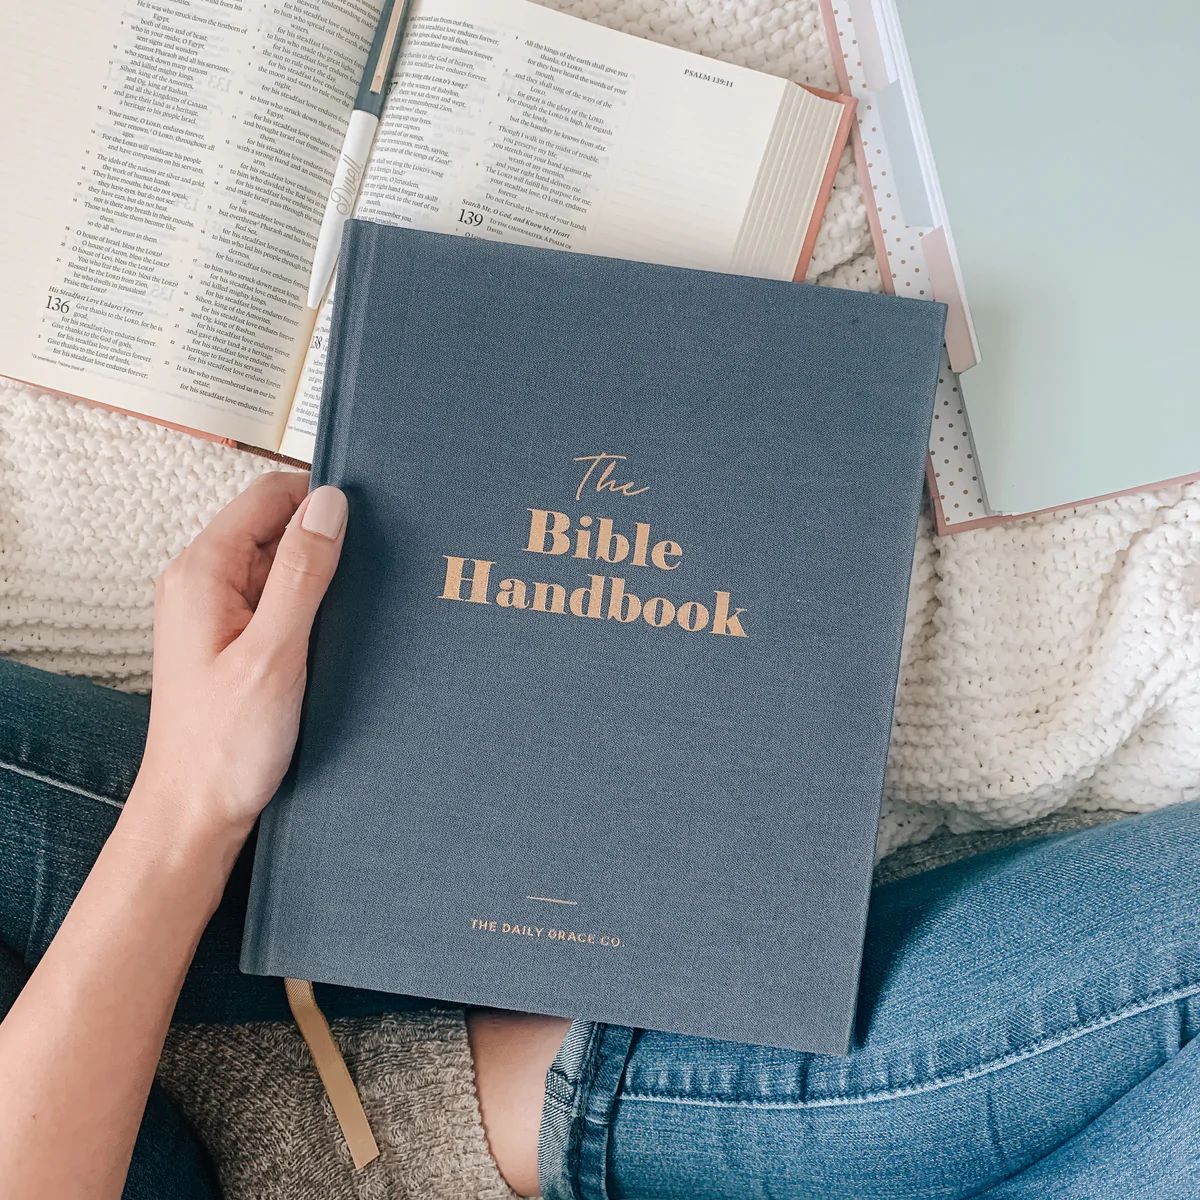 The Bible Handbook | The Daily Grace Co.